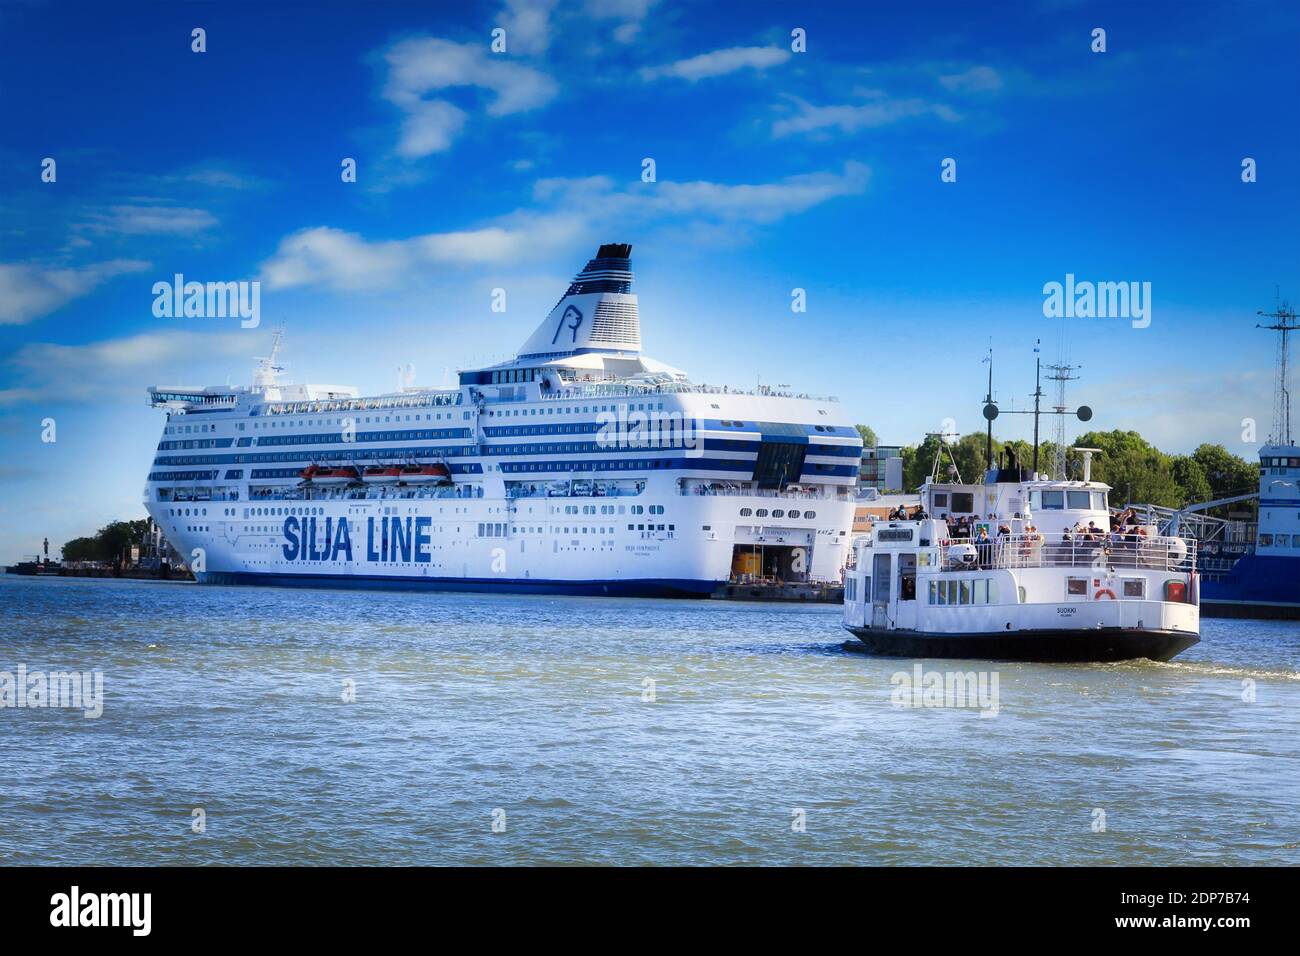 Silja Symphony cruise ferry docked in South Harbour and Suokki Helsinki-Suomenlinna ferry sailing on a sunny day. Helsinki, Finland. June 28, 2017. Stock Photo